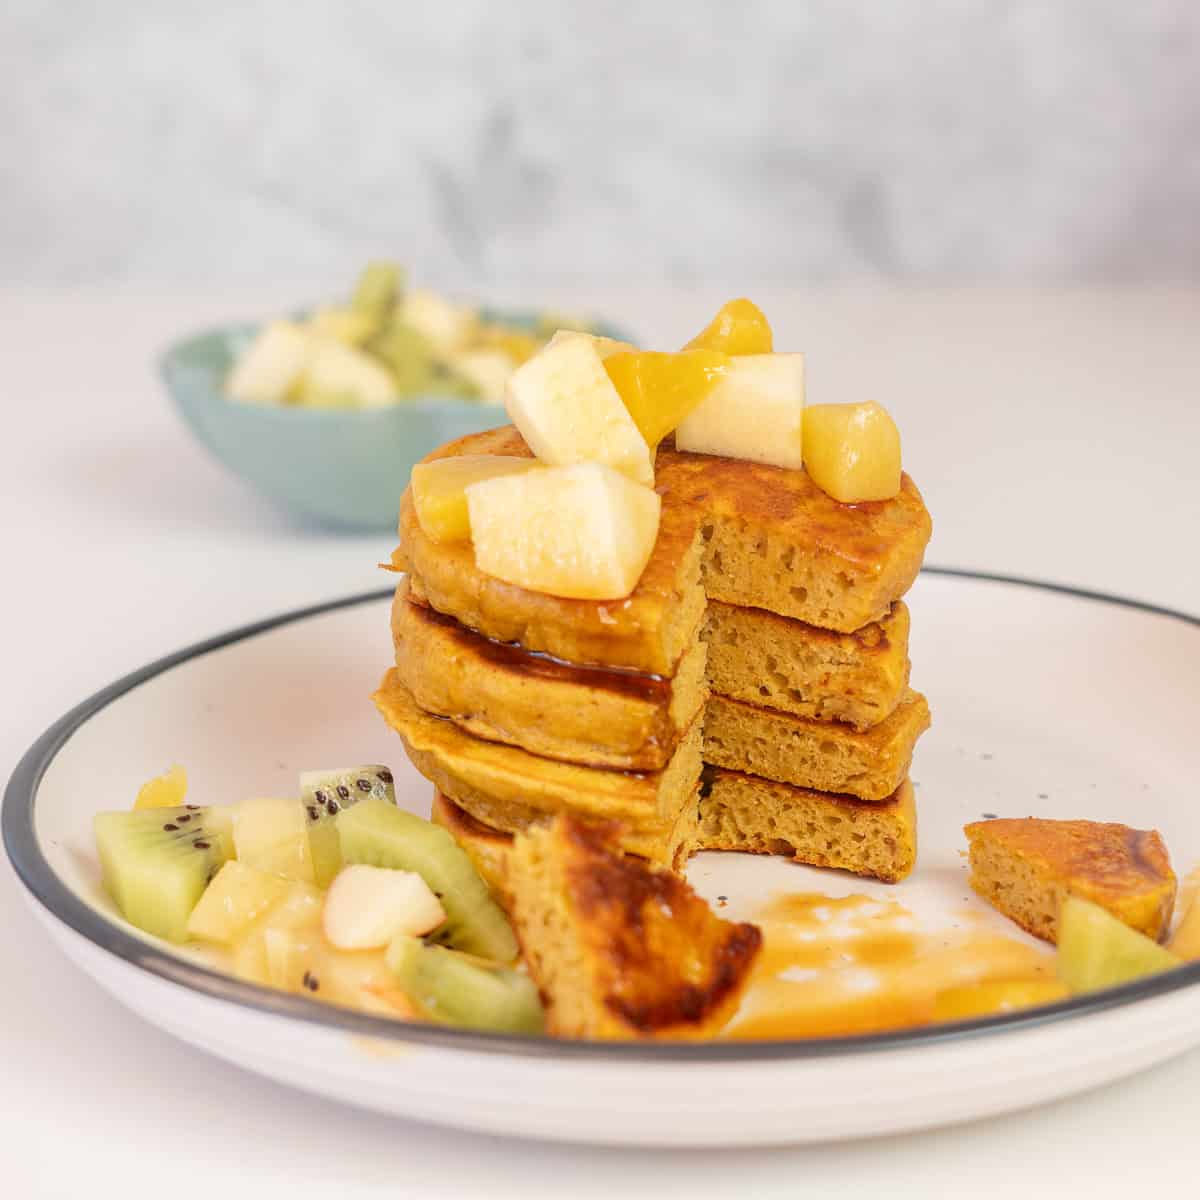 A stack of pancakes on a plate with a triangular wedge removed from the stack to show the fluffy inside of the pancakes. 